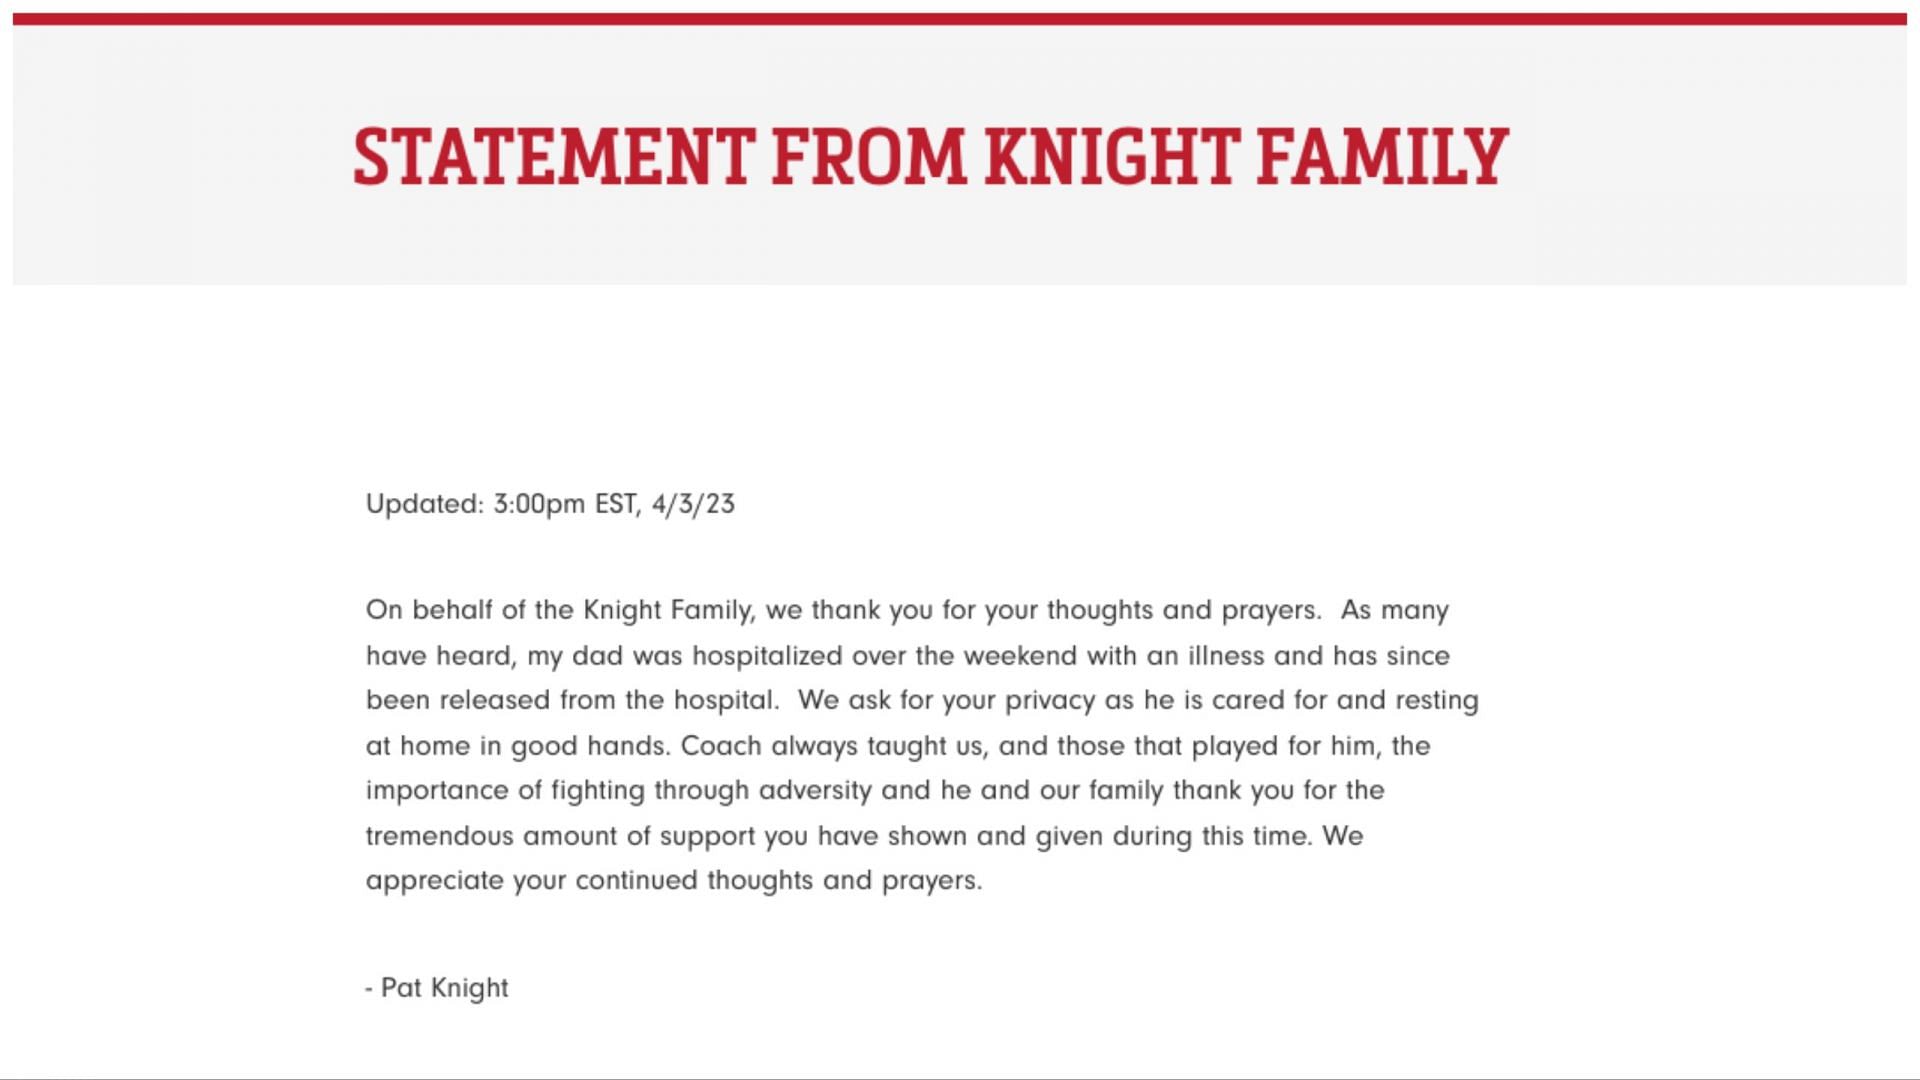 Pat knight release the statement about his father&#039;s health on his website. (Image via www.bobknight.com)